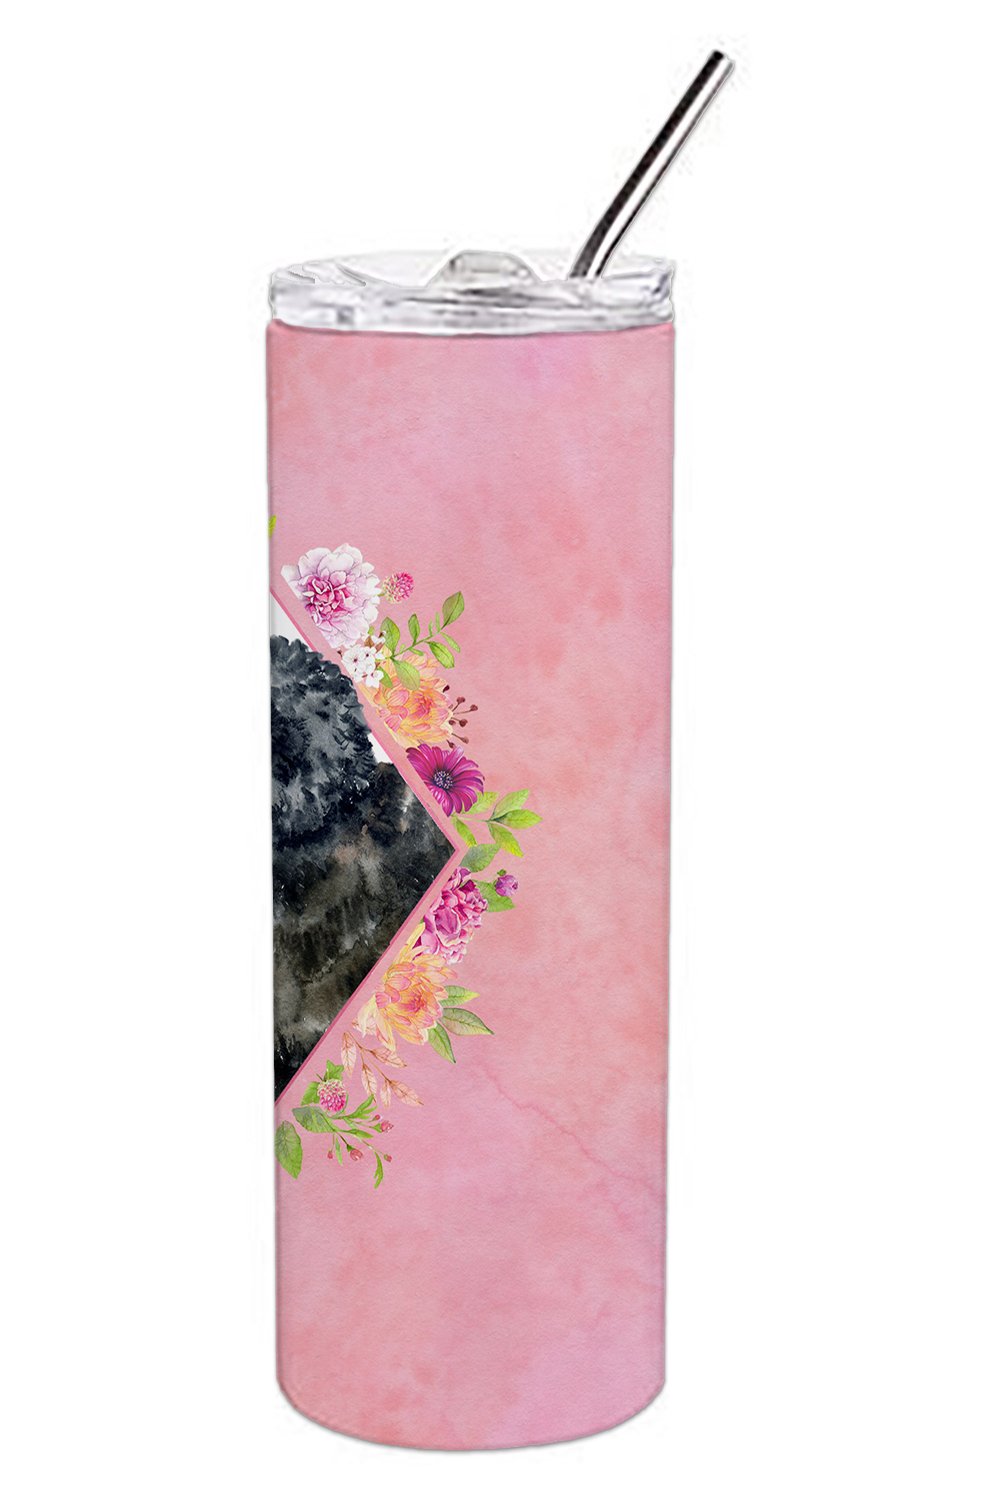 Newfoundland Pink Flowers Double Walled Stainless Steel 20 oz Skinny Tumbler CK4163TBL20 by Caroline's Treasures